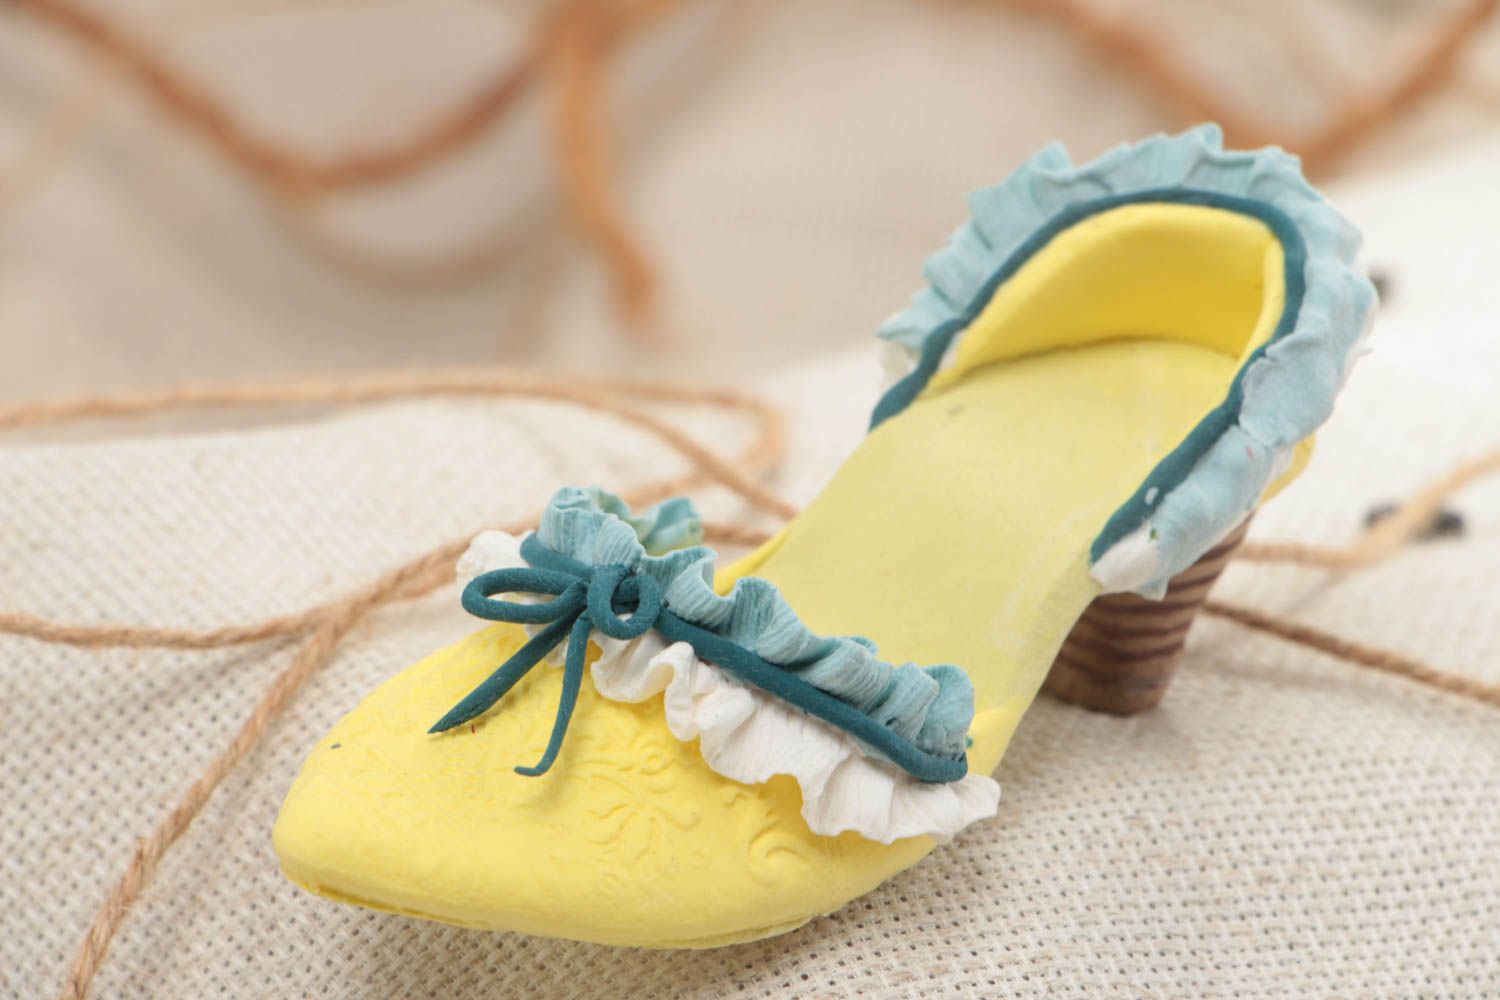 Handmade decorative polymer clay figurine of yellow and blue shoe for interior photo 1